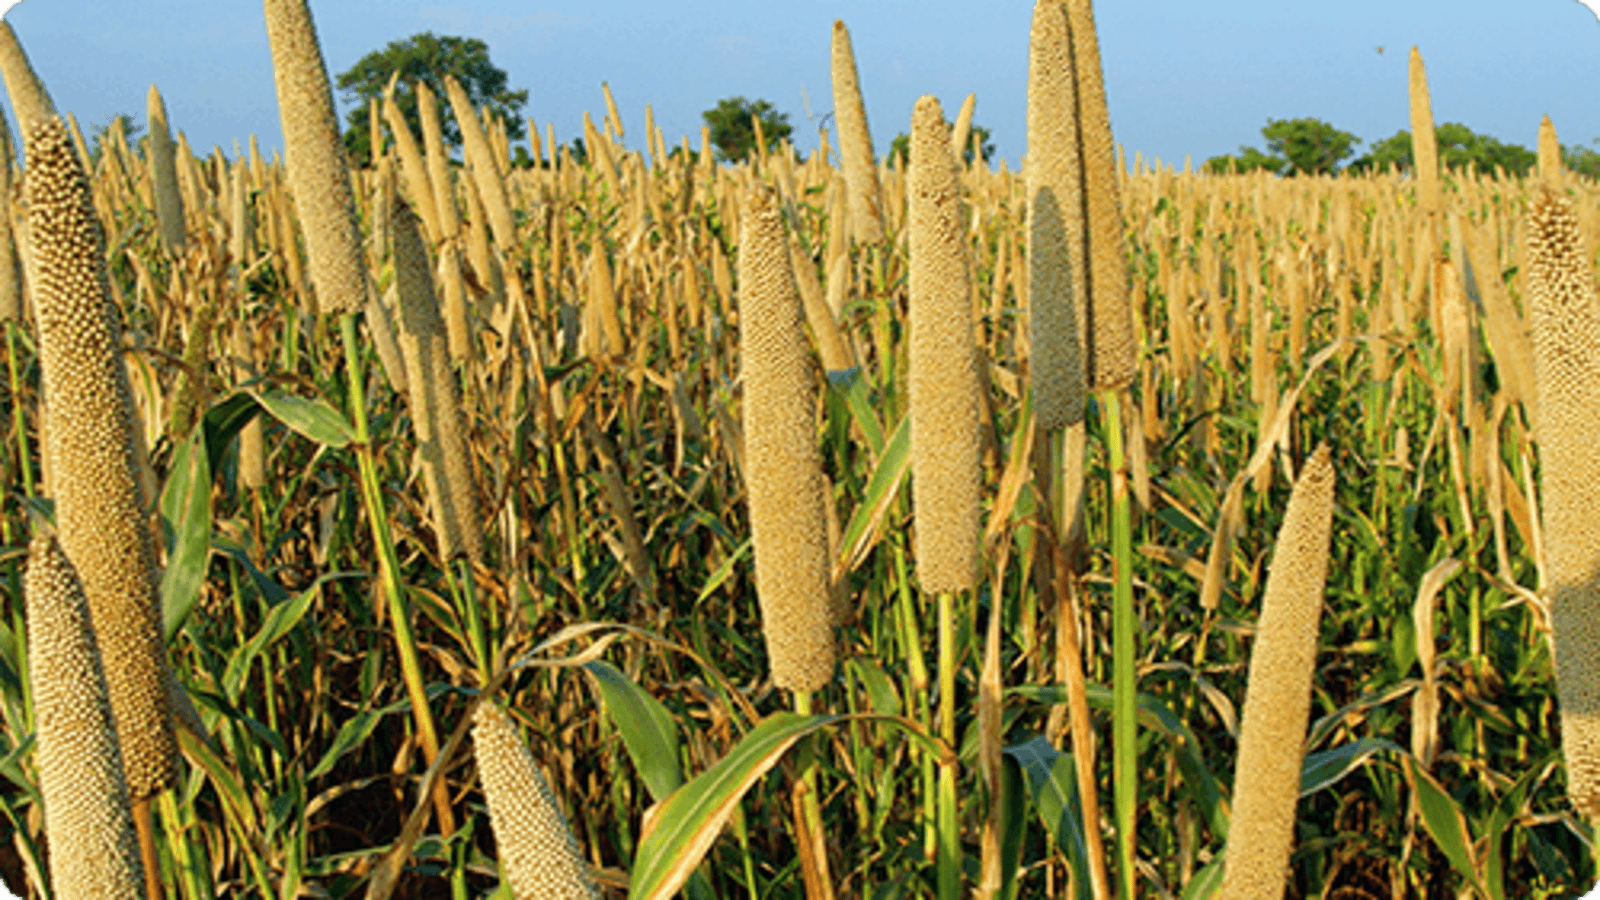 Norway invests US$58m into project aimed at developing new stress-tolerant finger millet varieties in East Africa